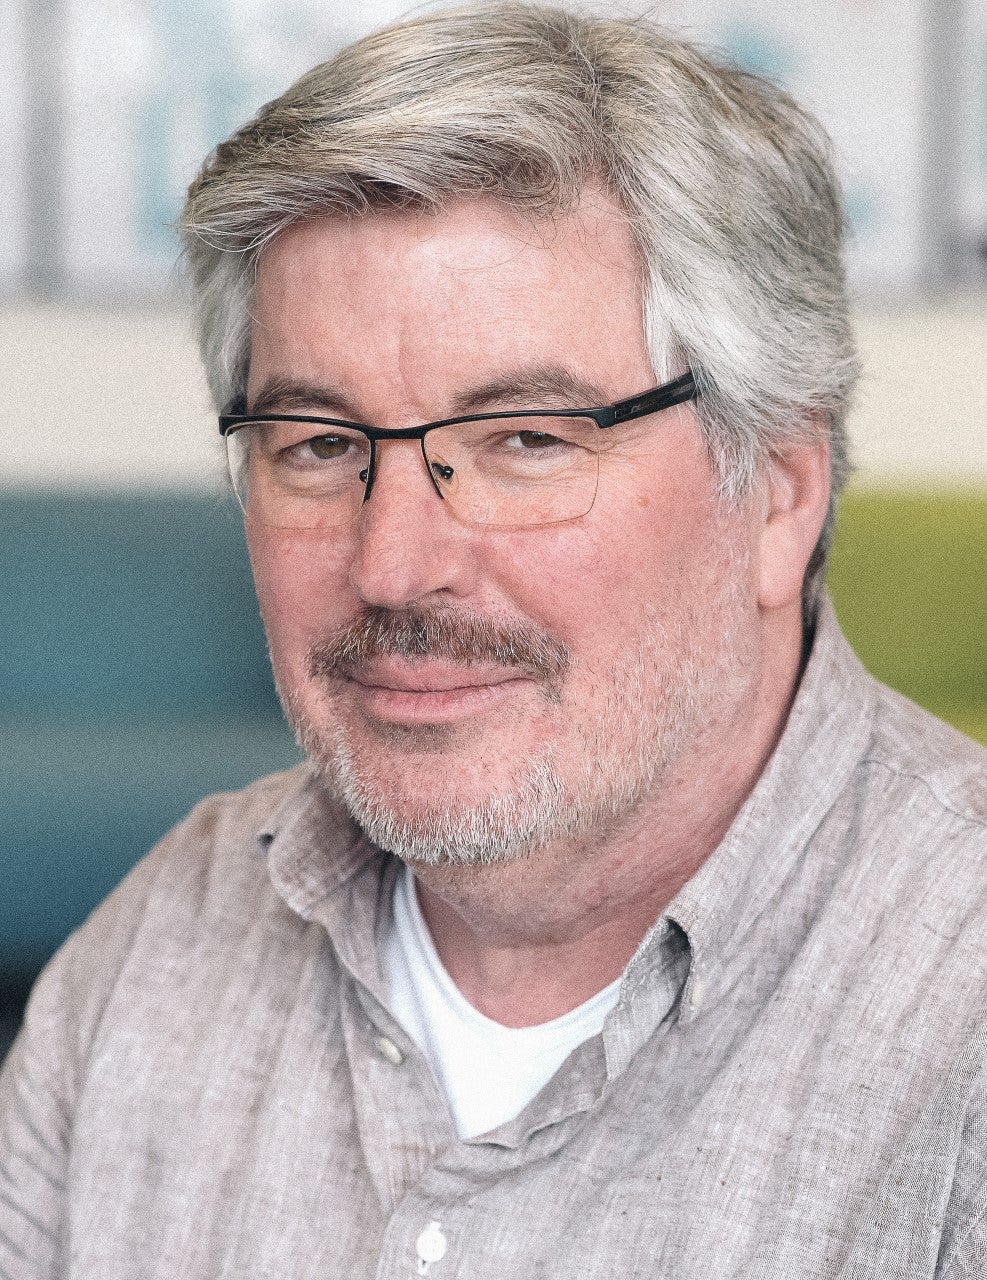 Portrait of man with grey hair and glasses with dark moustache and grey stubble dressed in a grey shirt and white t-shirt.